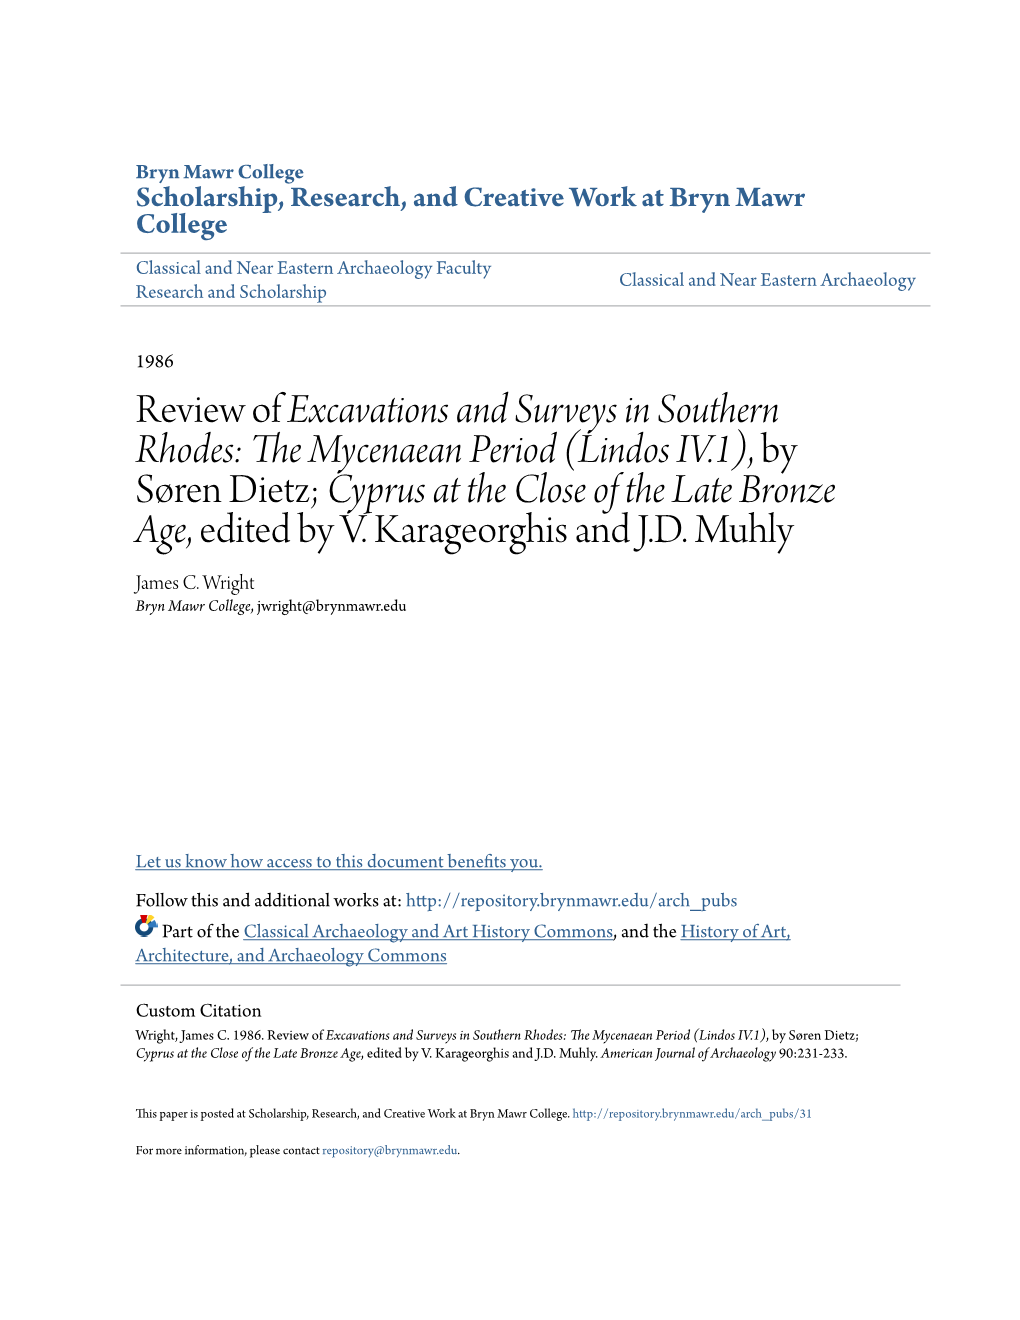 Review of Excavations and Surveys in Southern Rhodes: the Mycenaean Period (Lindos IV.1), by Søren Dietz; Cyprus at the Close of the Late Bronze Age, Edited by V